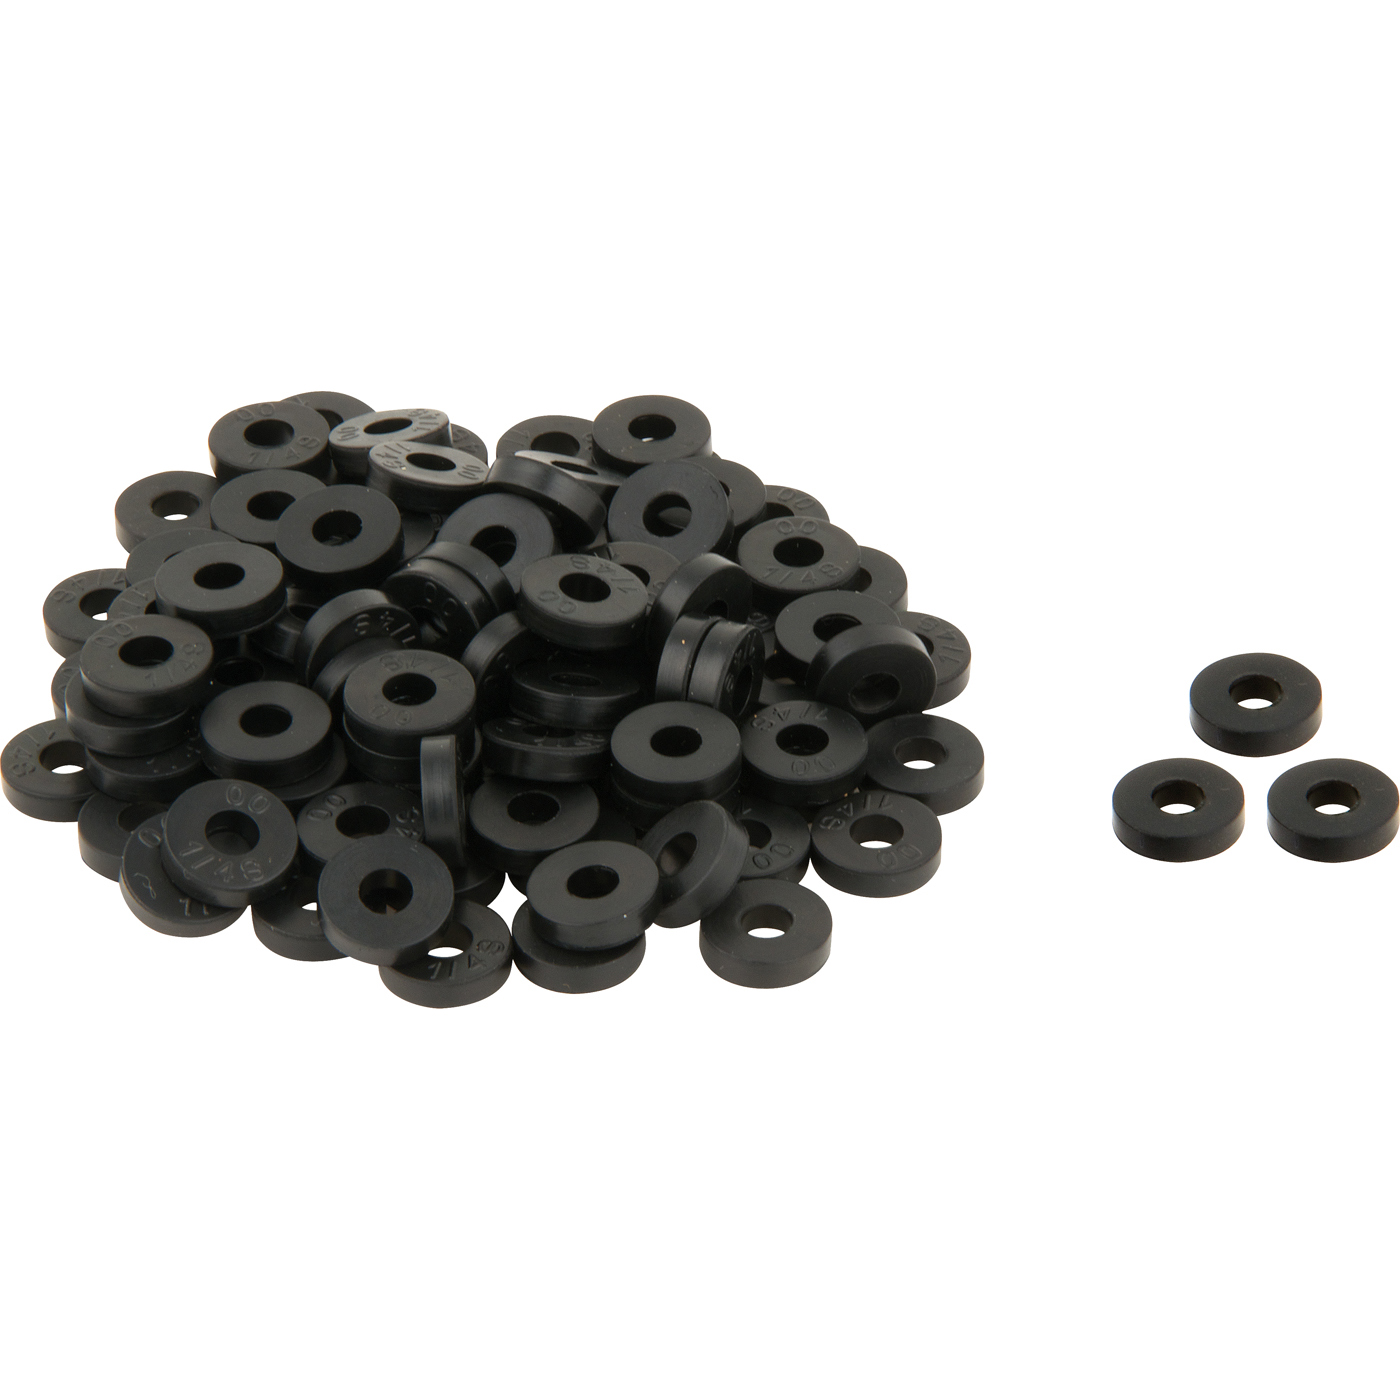 Flat faucet washers - 1/2